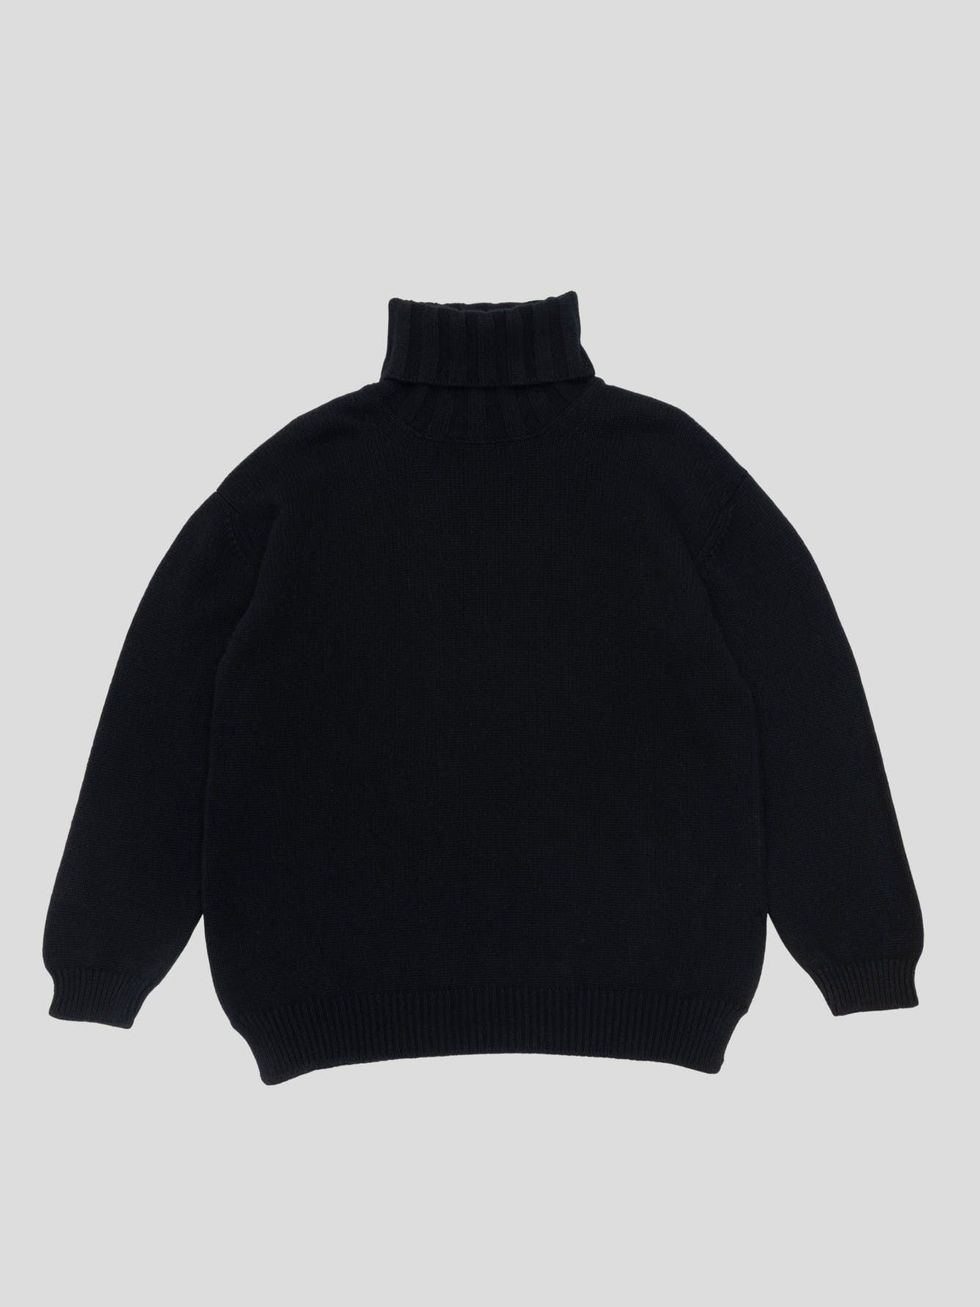 17 Best Turtleneck Jumpers to Keep You Toasty This Winter